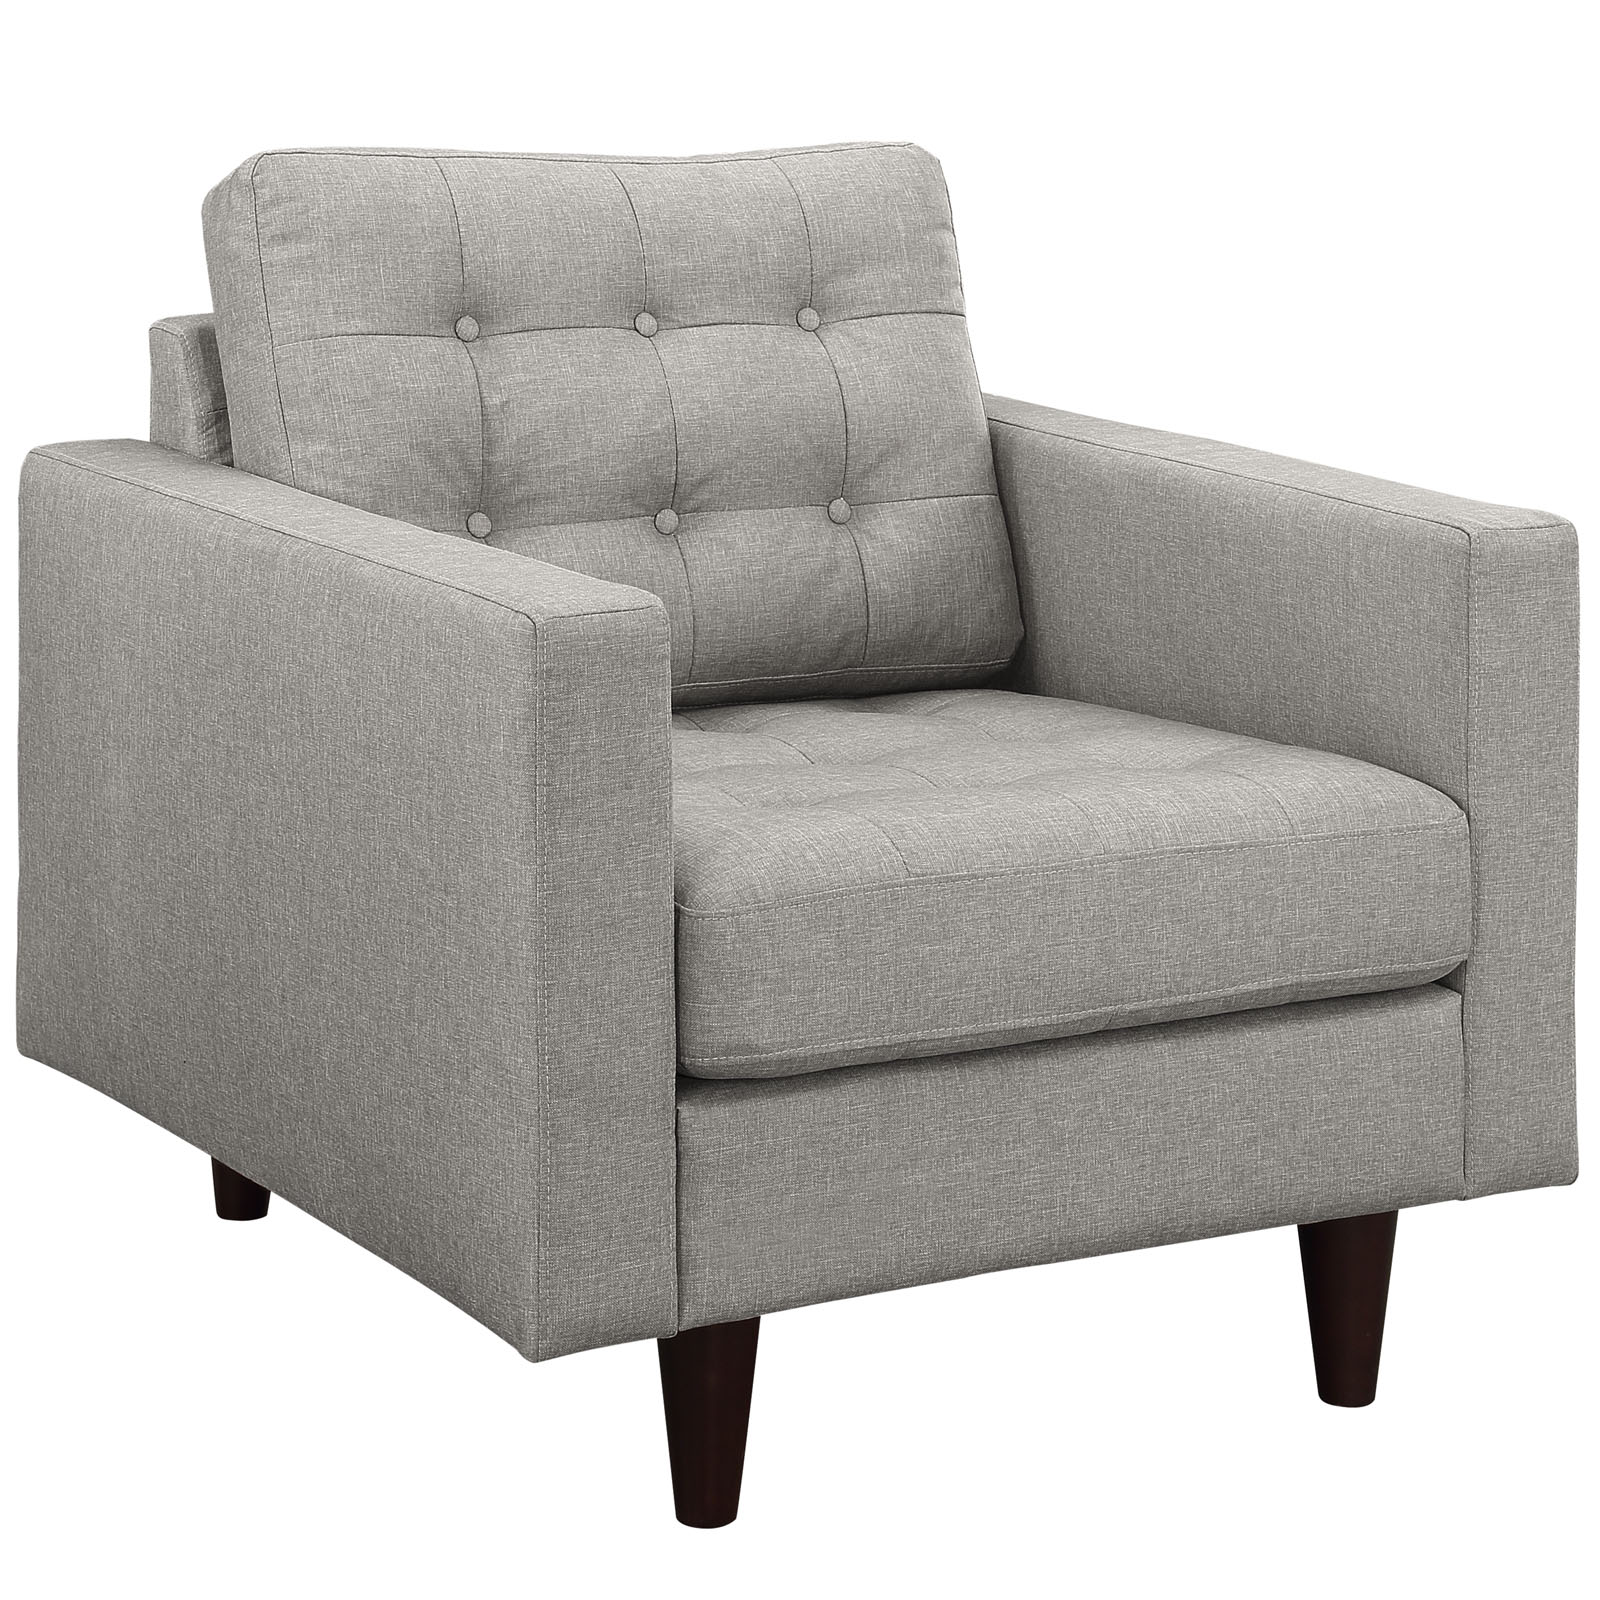 Modway Empress Upholstered Fabric Armchair in Light Gray - image 2 of 5